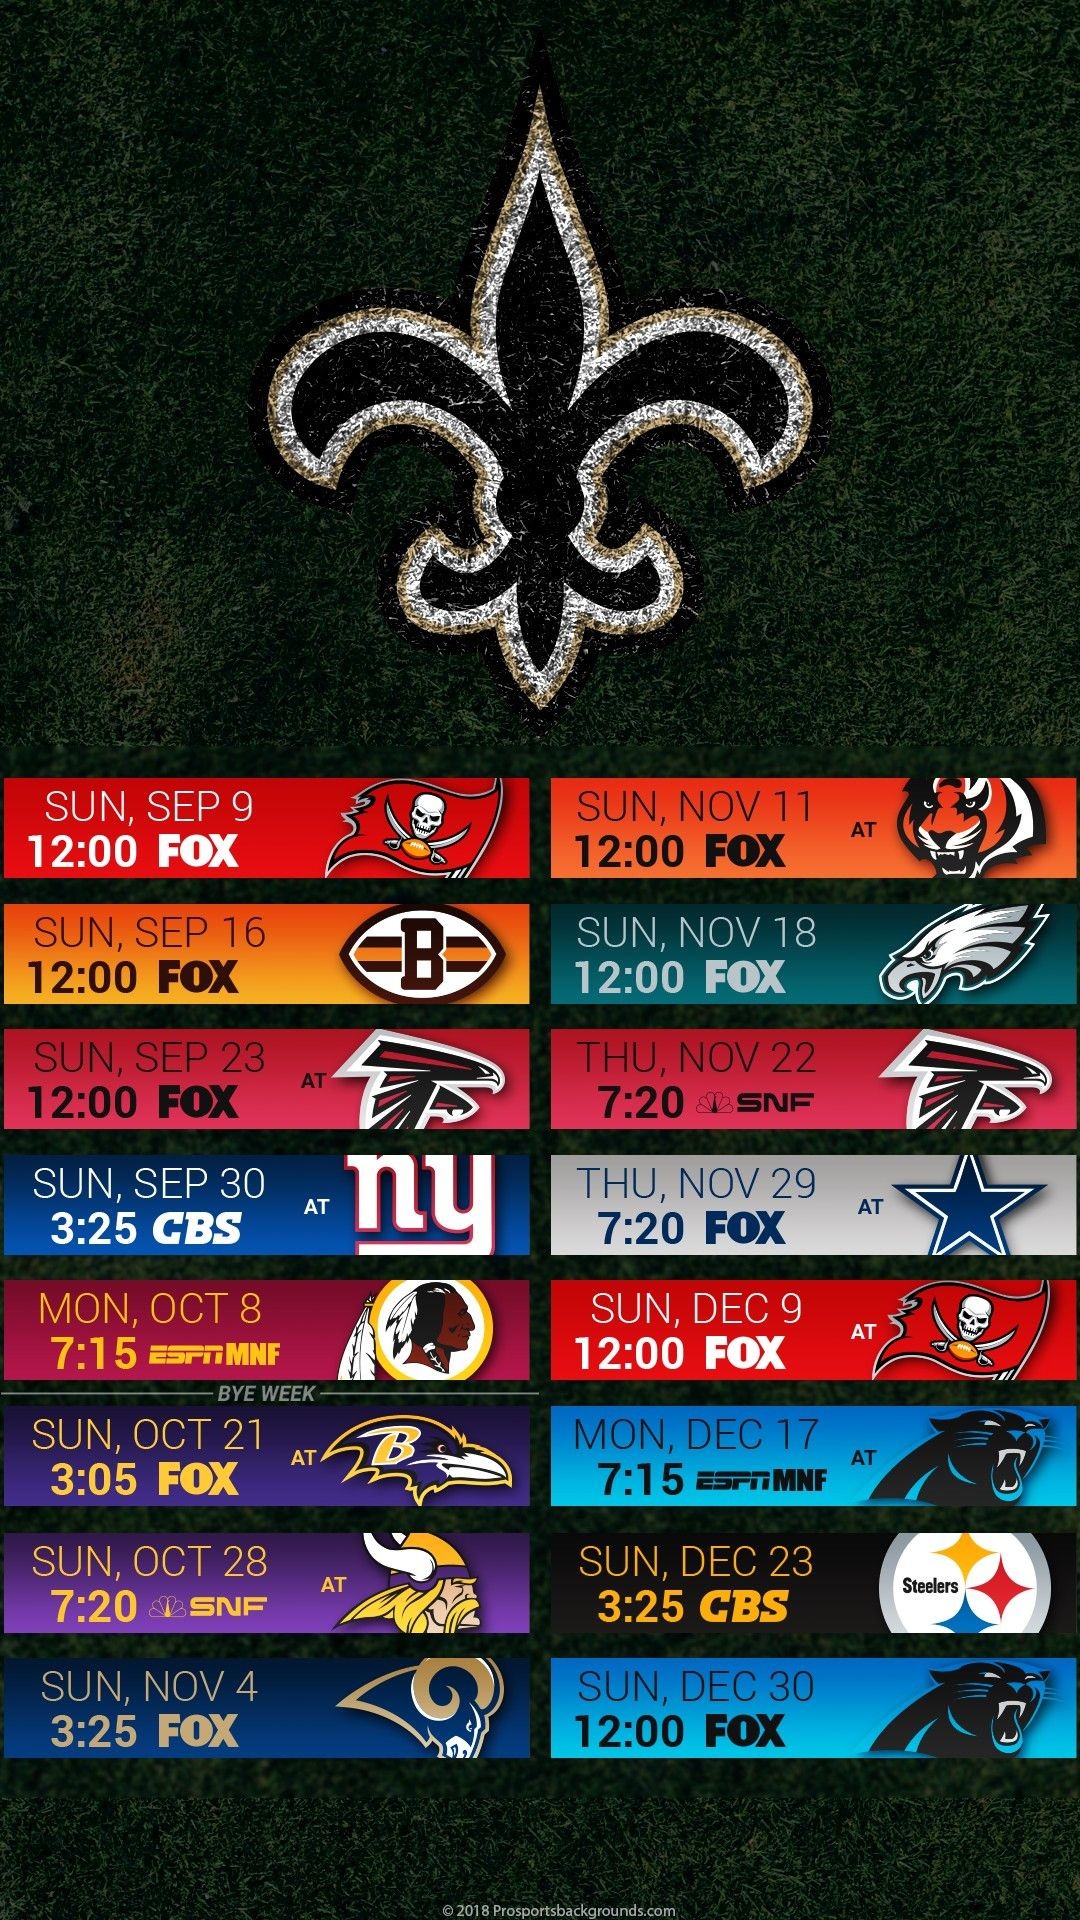 1080x1920 2018 New Orleans Saints I-Phone & Android Wallpaper Schedule. #Whodat